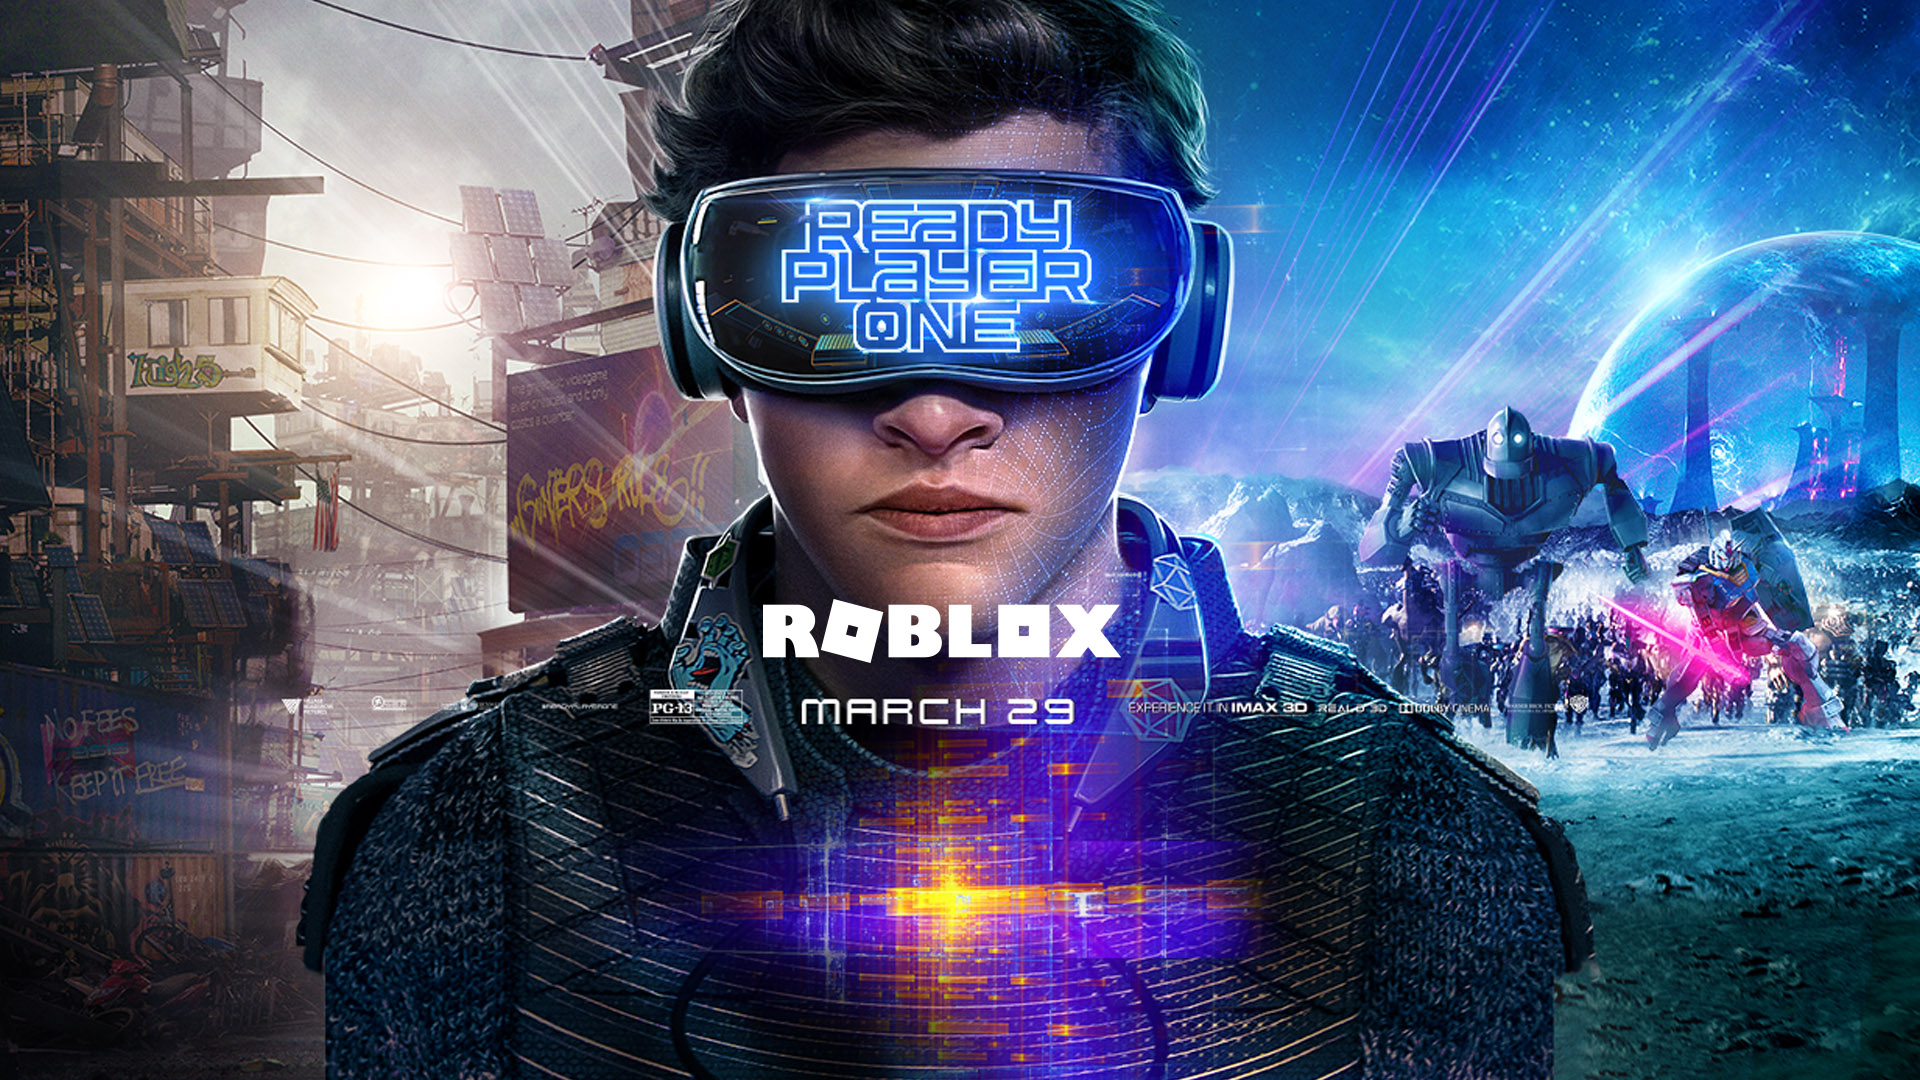 A Look Inside The Roblox Ready Player One Adventure So Far